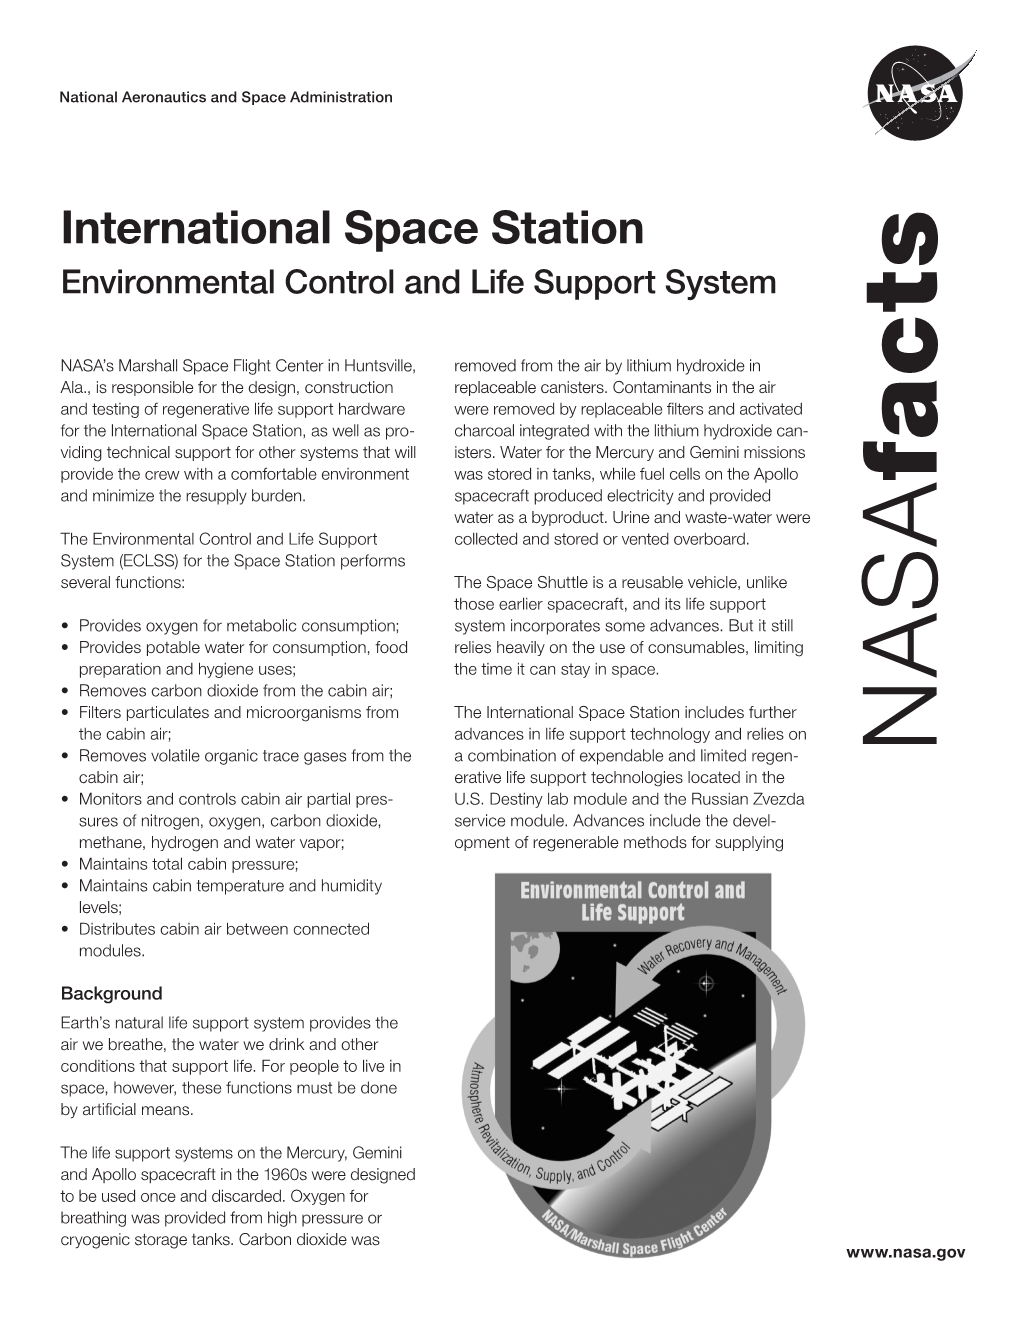 International Space Station Environmental Control and Life Support System